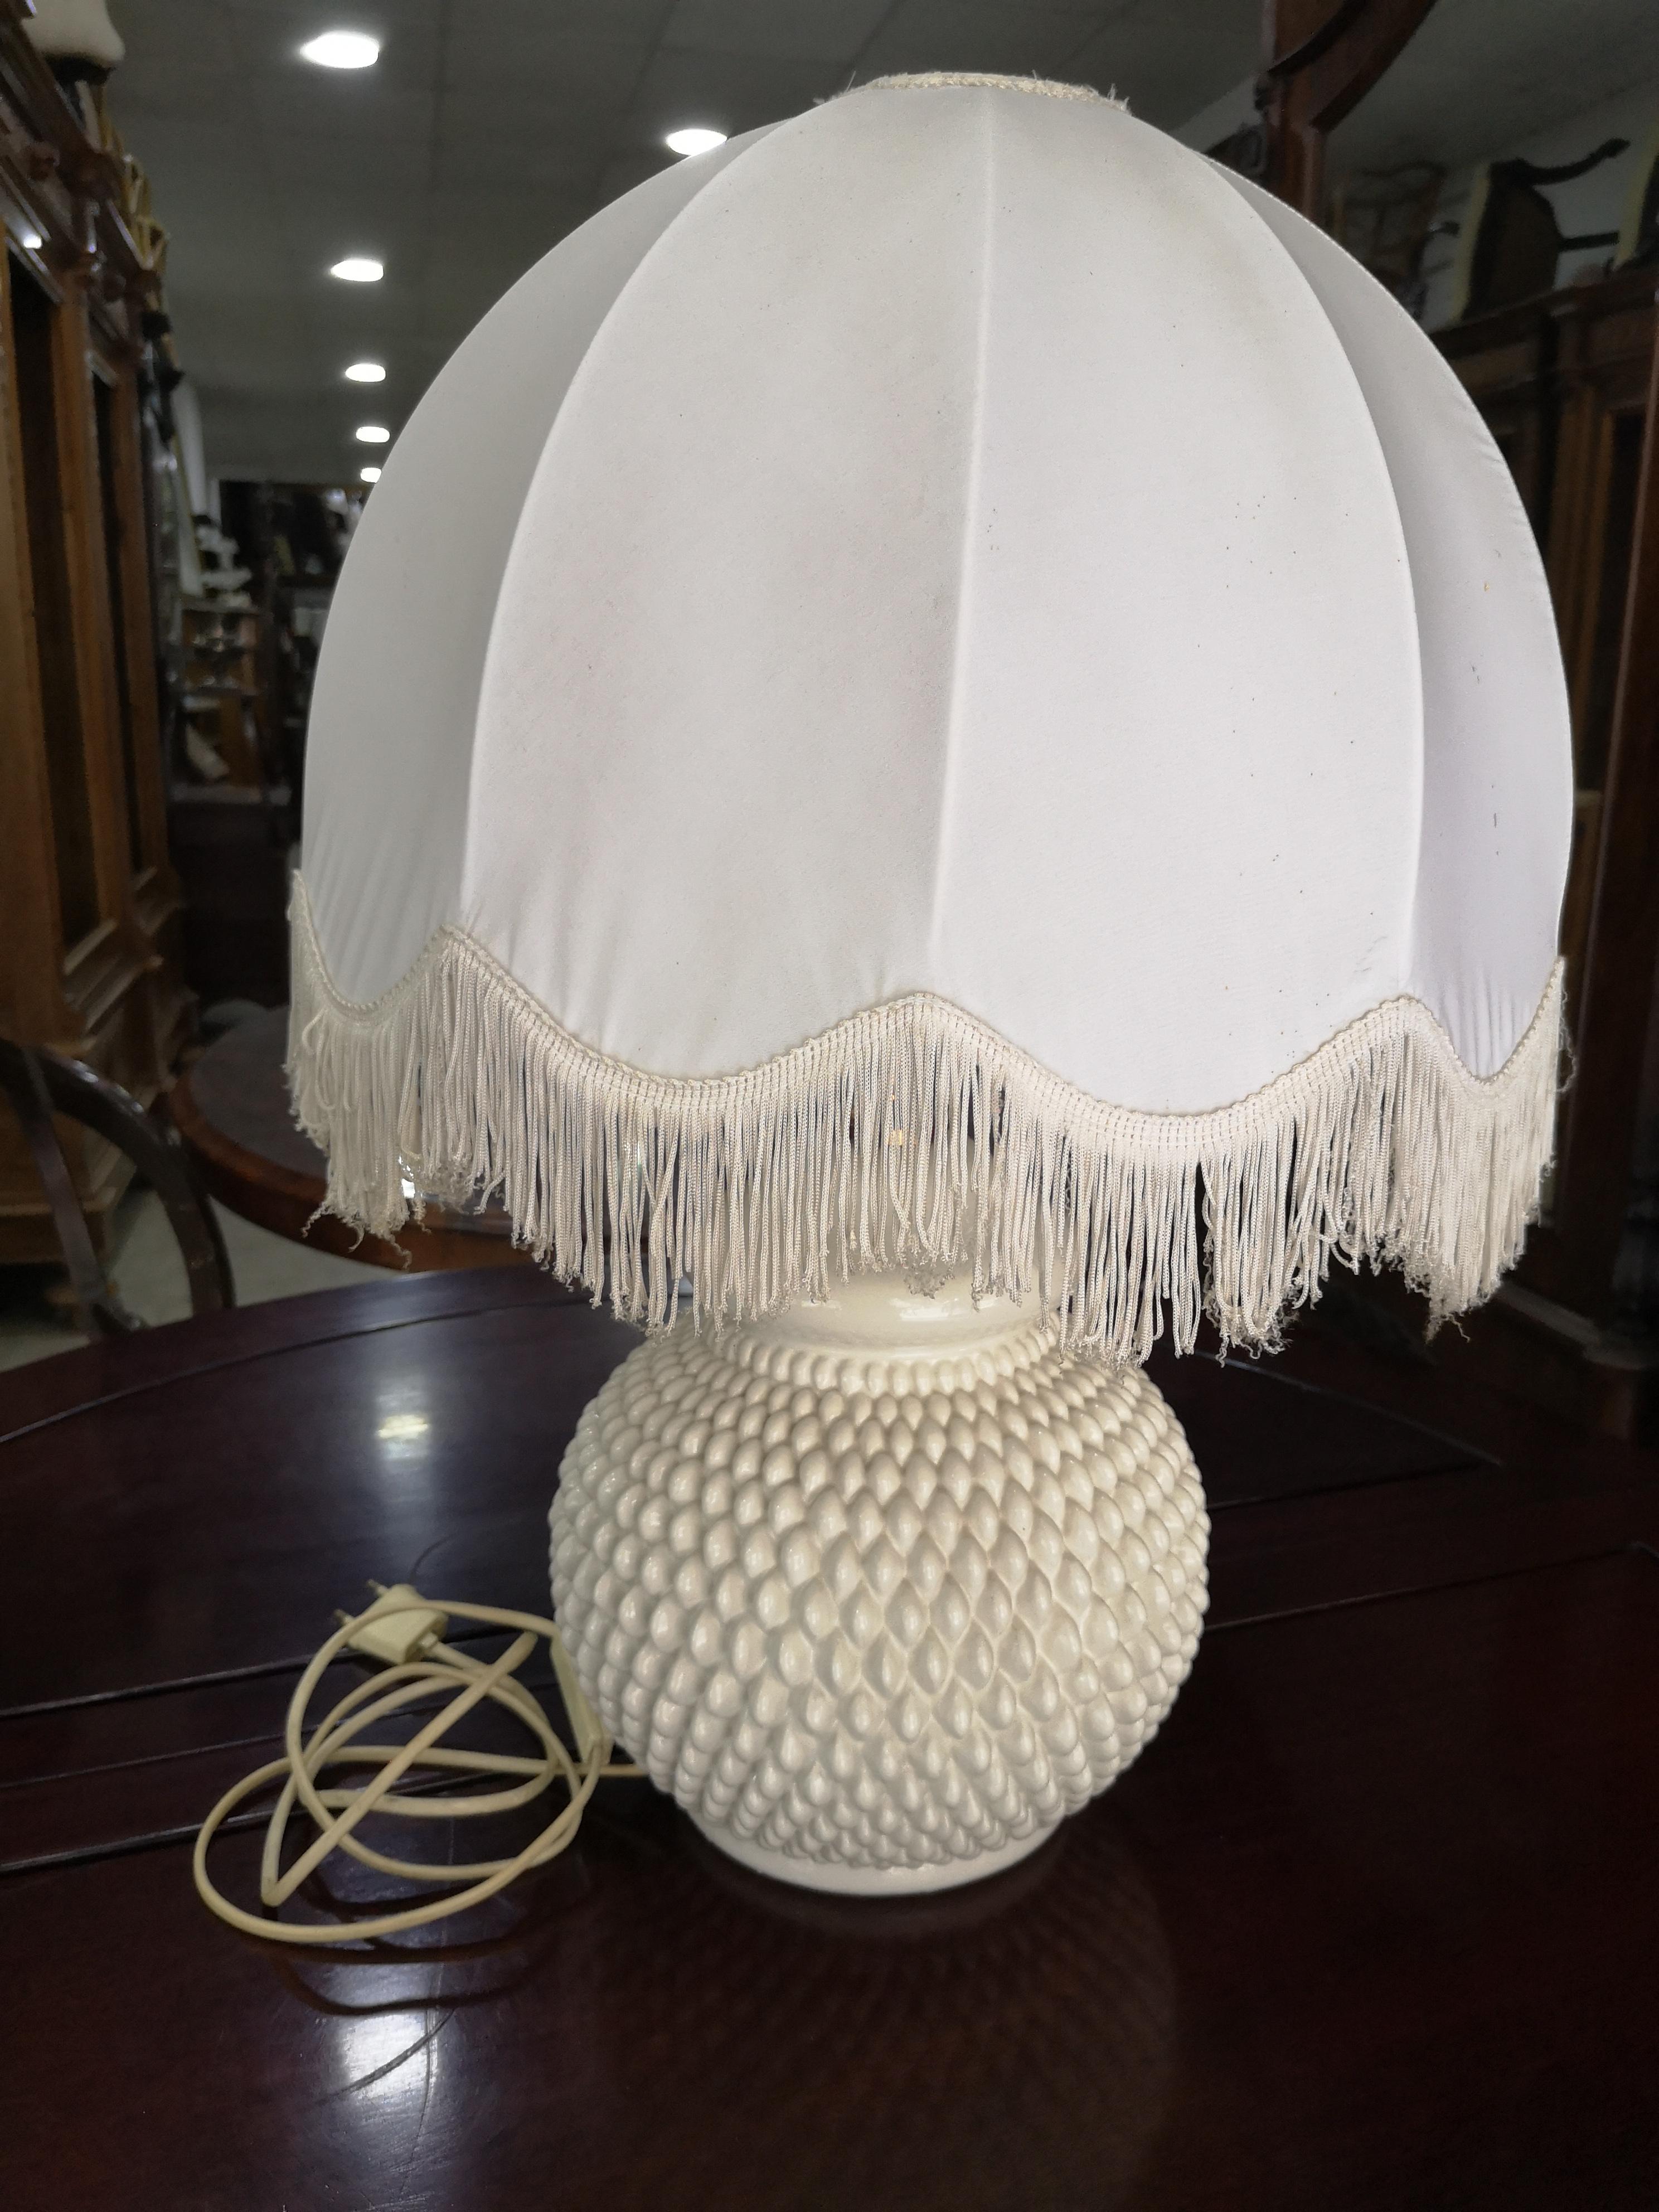 Vintage hobnail table lamp in white ceramic 1970s

Very unusual lamp because of the type of workmanship 

Measures:

Altezza totale  with lampshade cm 60 approx
Lampshade width  cm 40 approx
Lamp base height  cm 27
Width  cm 25

Available for